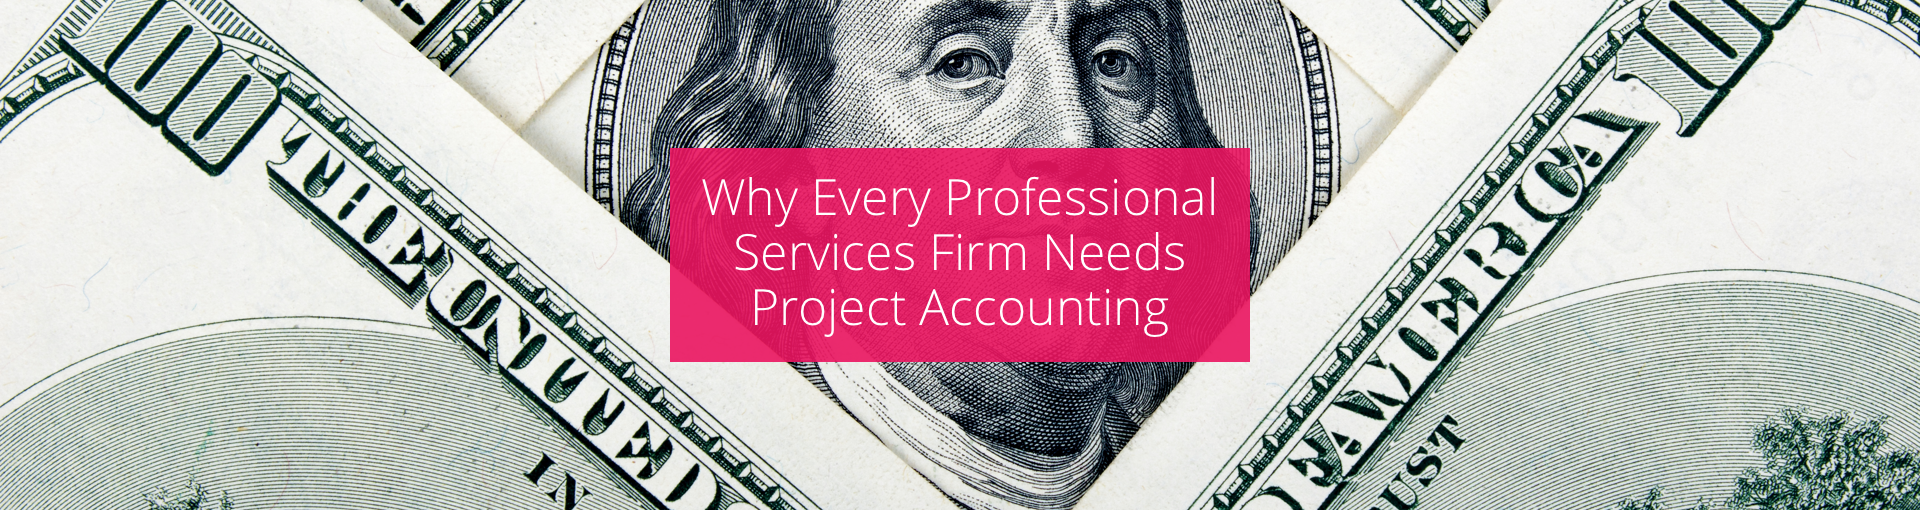 Why Every Professional Services Firm Needs Project Accounting Featured Image